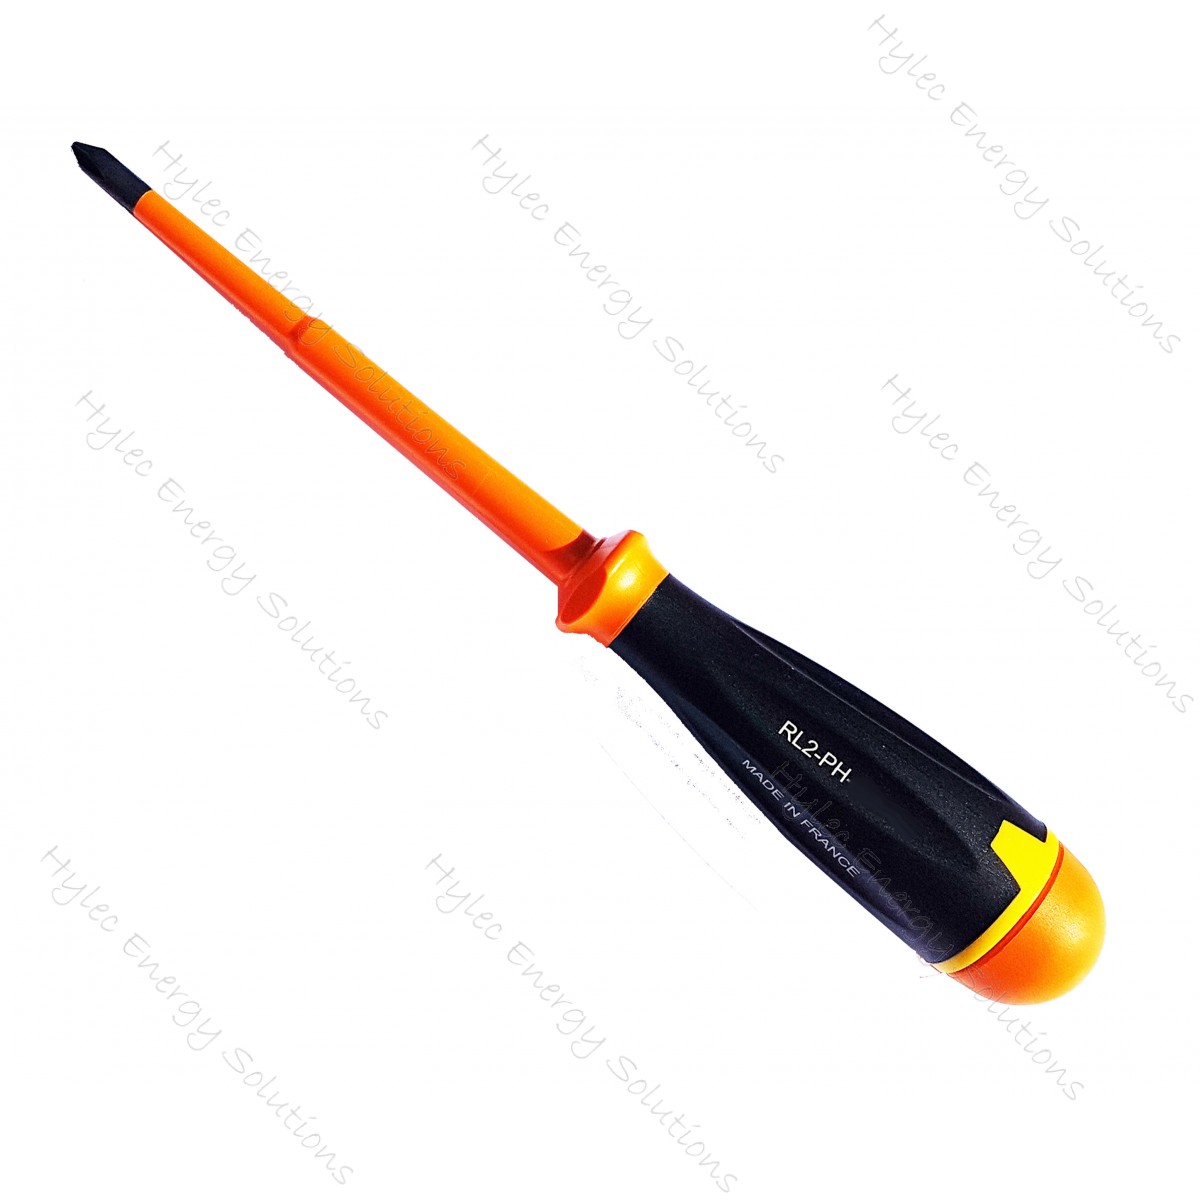 Sibille Screwdriver 10,000 Volt Rated Made in France